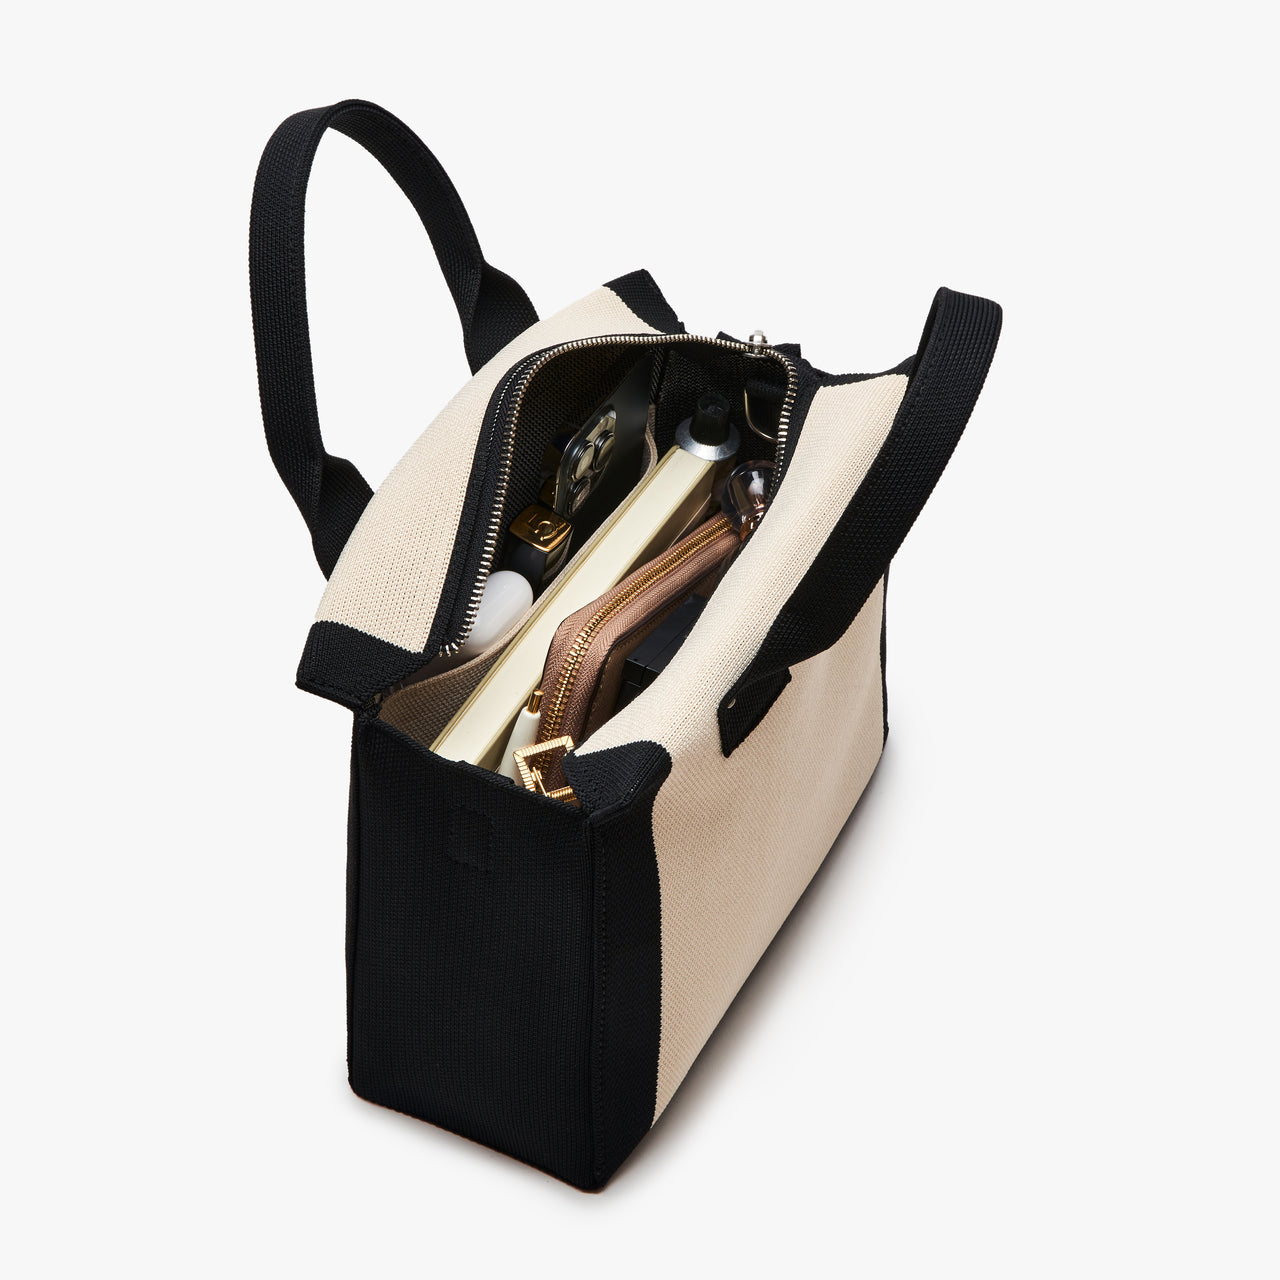 ANEW M Bag - Cream Black – ANOTHERSOLE | SG